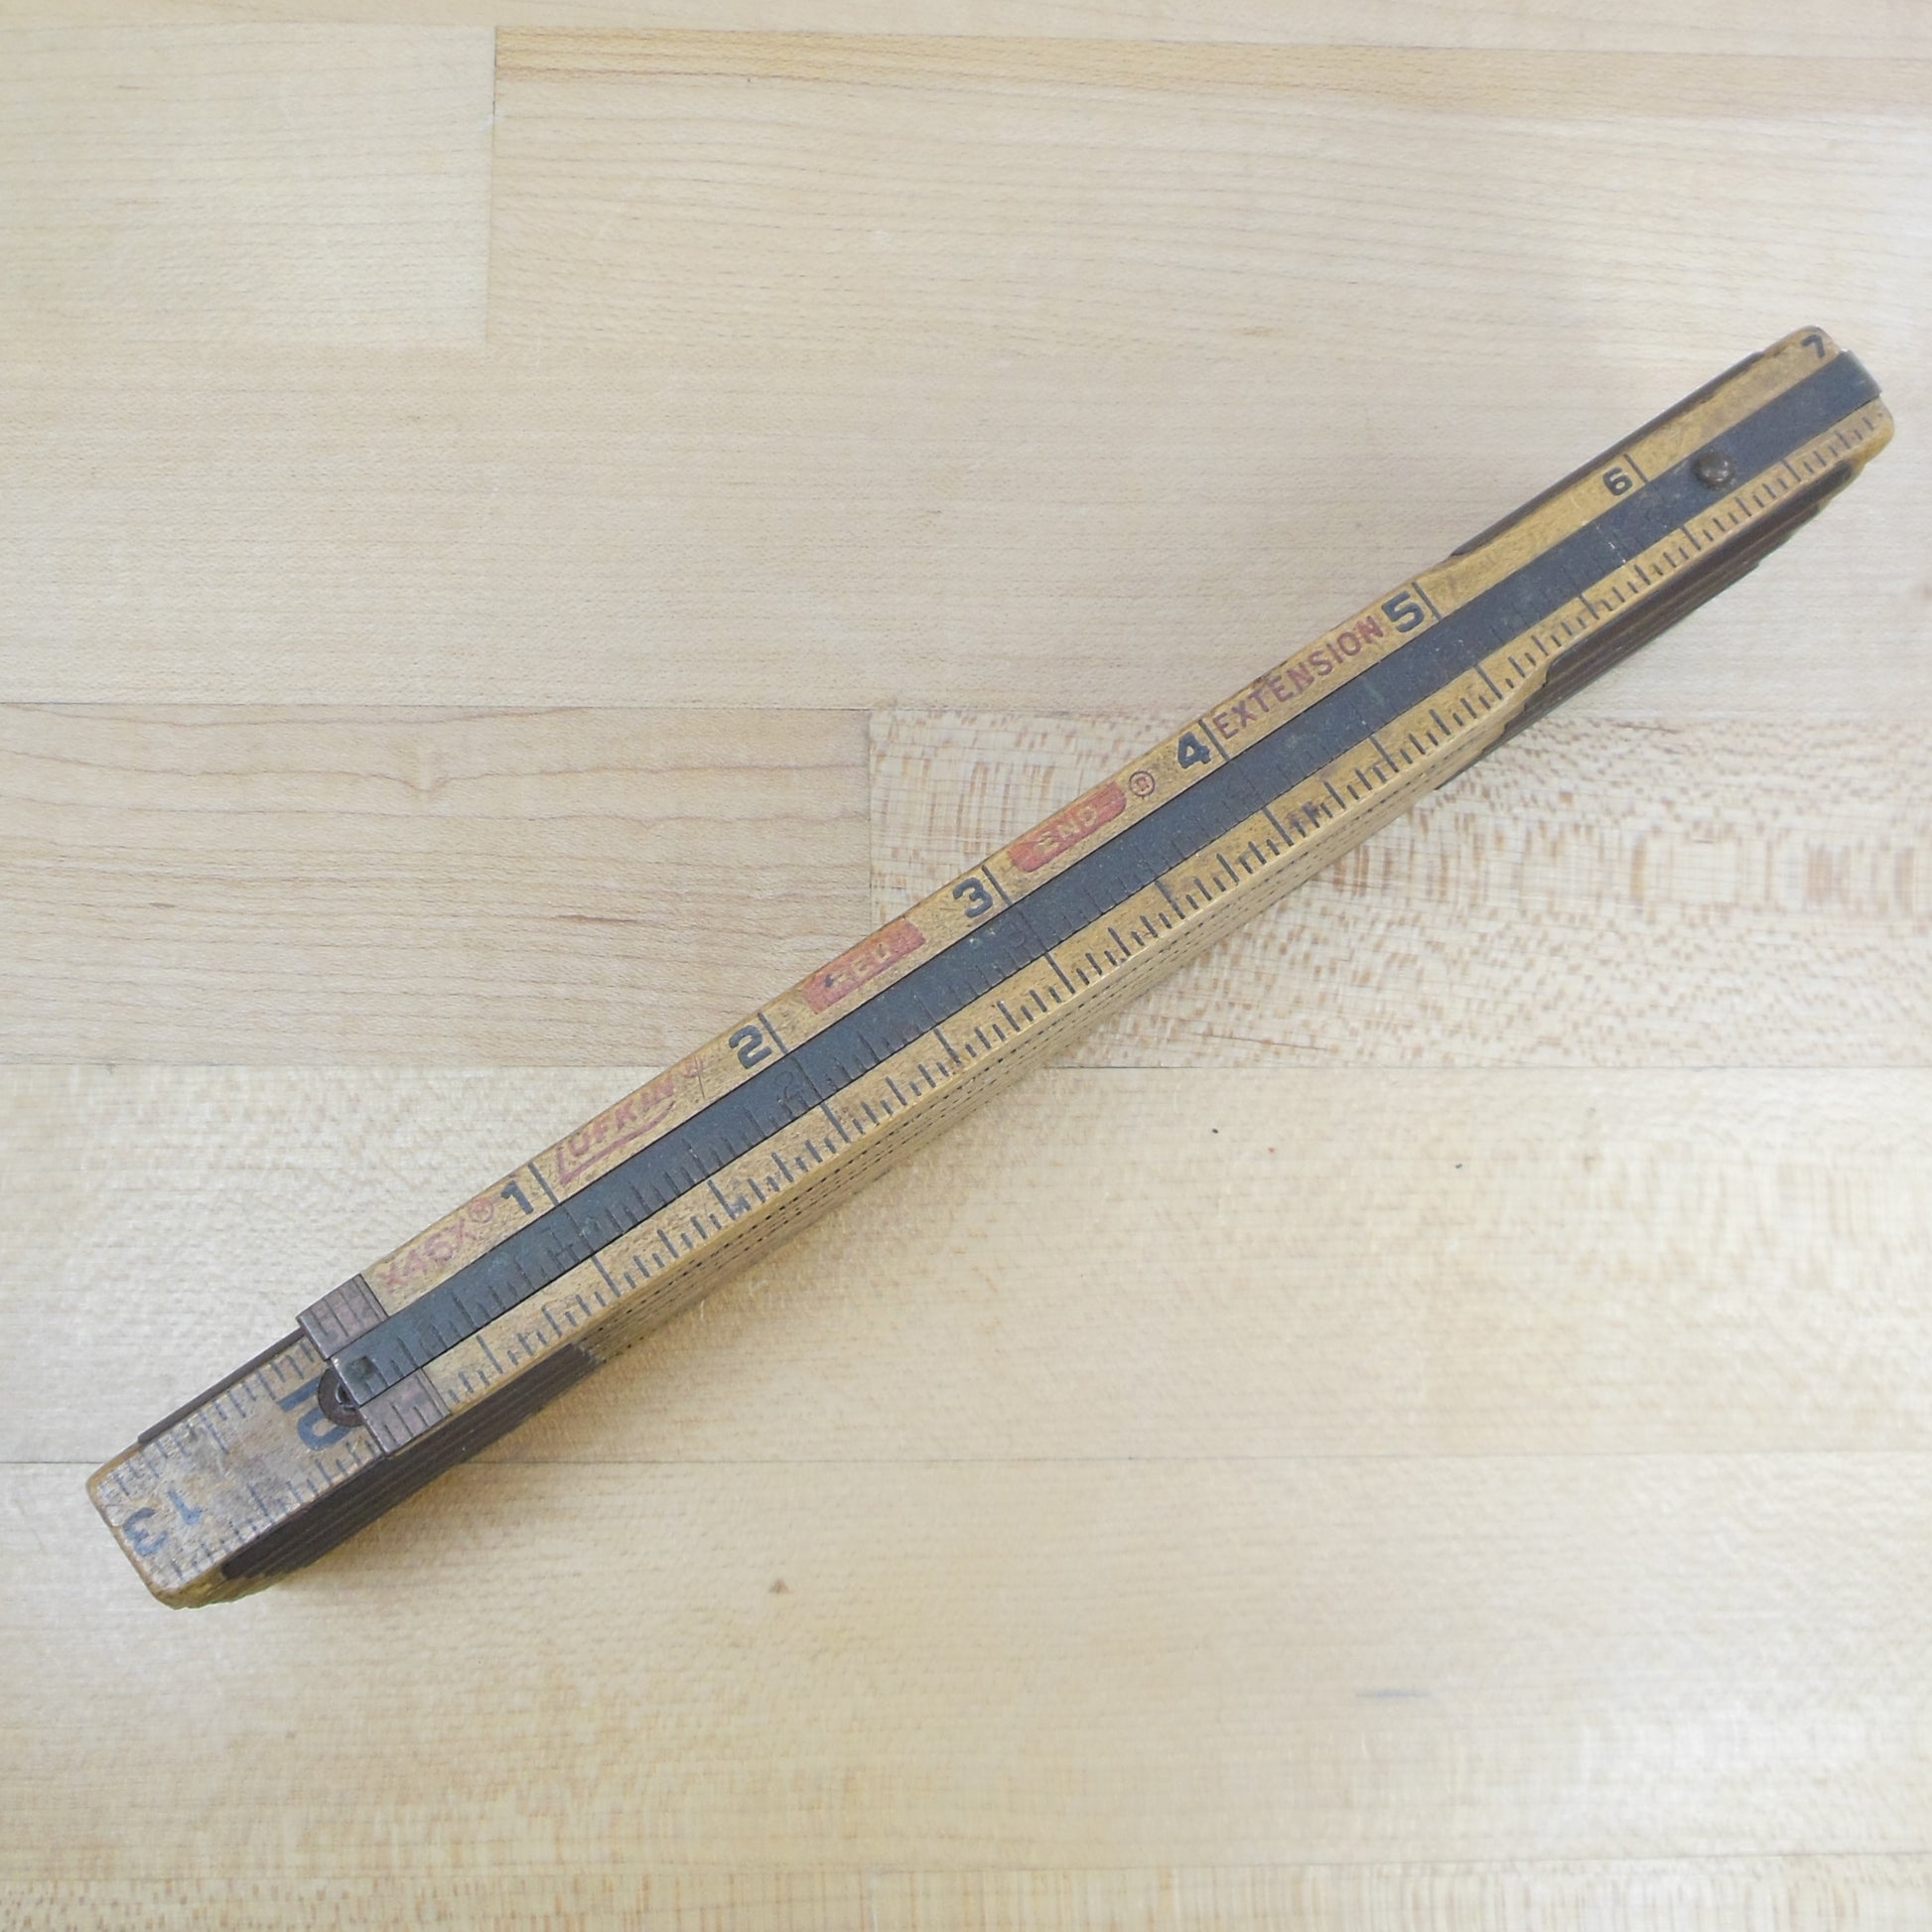 Vintage Collectible Wooden FOLDING EXTENSION RULER W/Sliding Insert Mini  Ruler